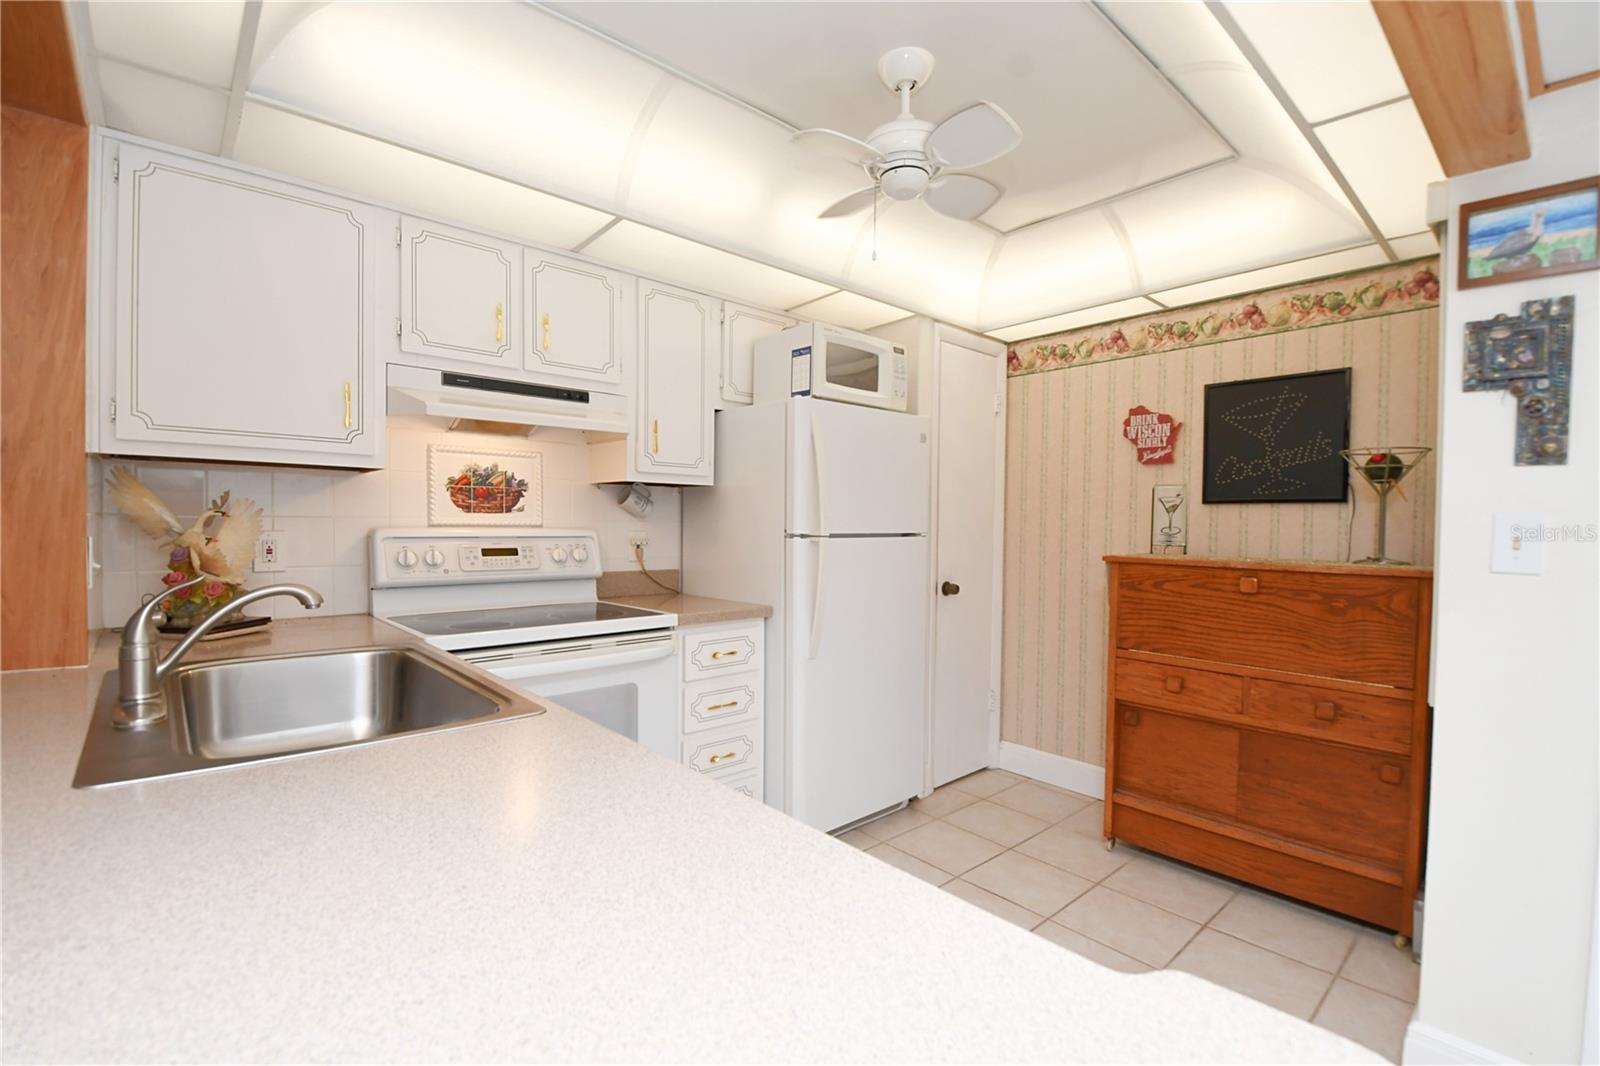 The kitchen includes a light-up tray ceiling with a fan in the middle, an extra-large sink with a garbage disposal, and a beautiful Corian countertop.